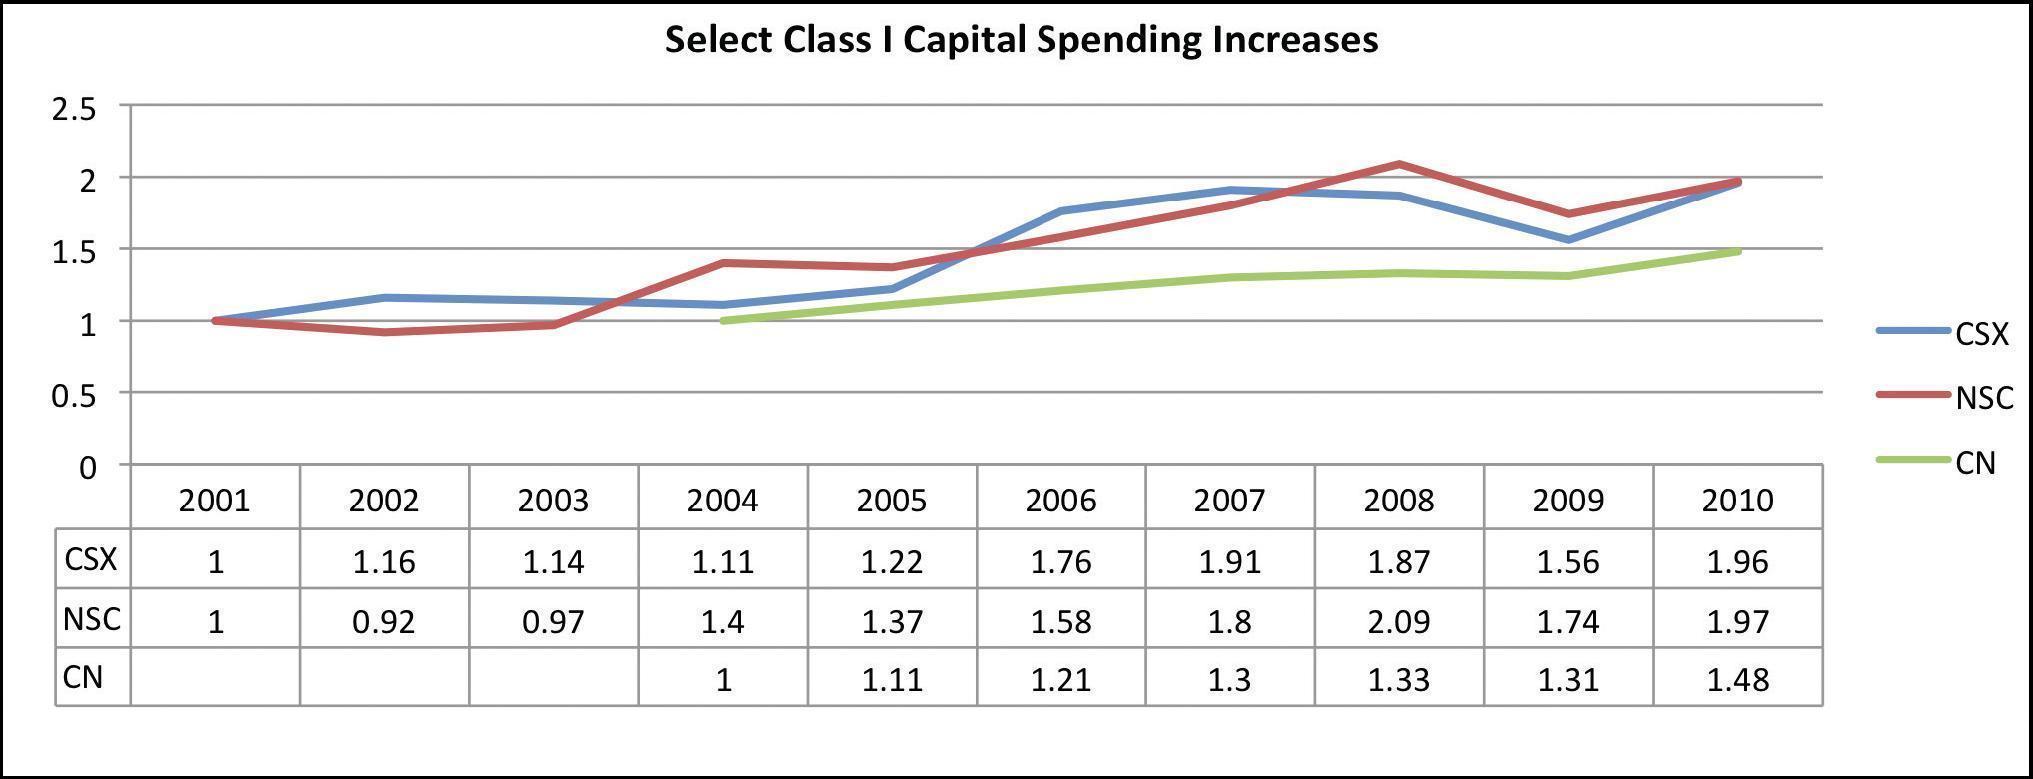 Figure 11 is a trendline chart illustrating the capital spending trends of three major railroads, the CSX, the NS and the CNI.  It illustrates that with 2001 as the base year, capital expenditures by CSX steadily rose and had increased by 96 percent by 2010.  For NS, the capital spending increased 97 percent.  The figures for CN only run from 2005 to 2010 but illustrate that in those six years, capital spending for CN increased 48 percent.